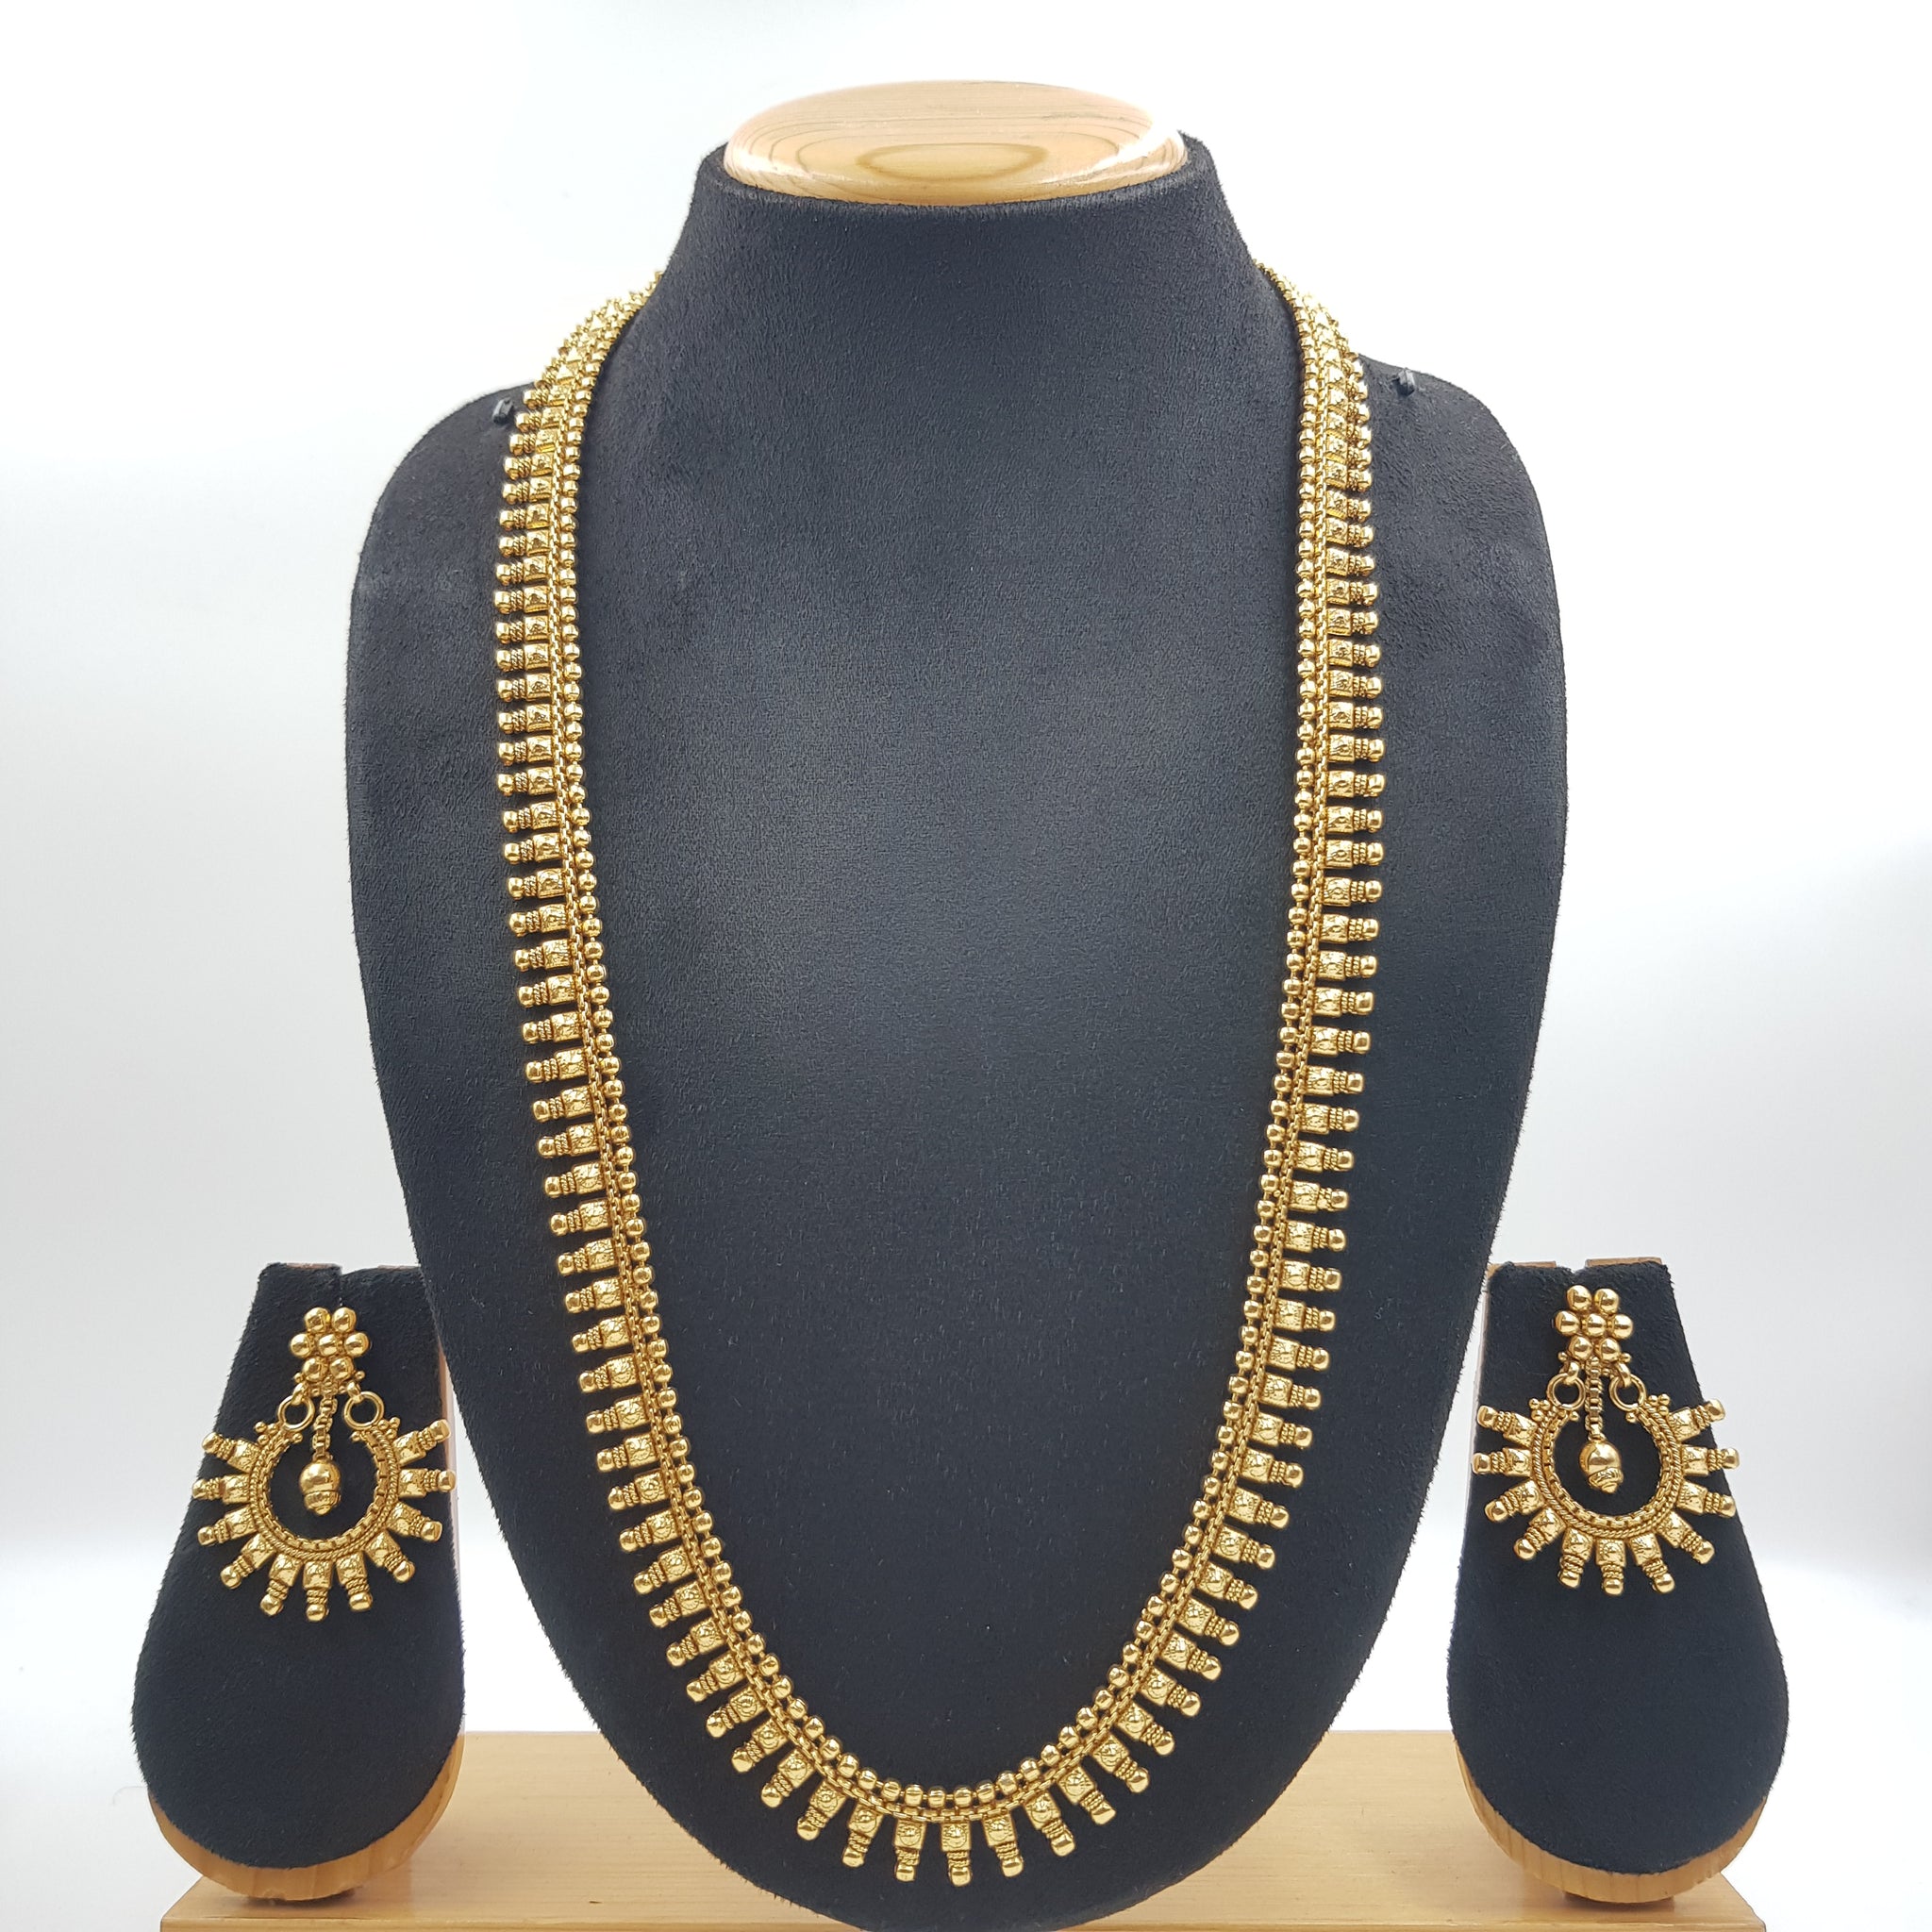 Long Neck Gold Look Necklace Set 7139-33